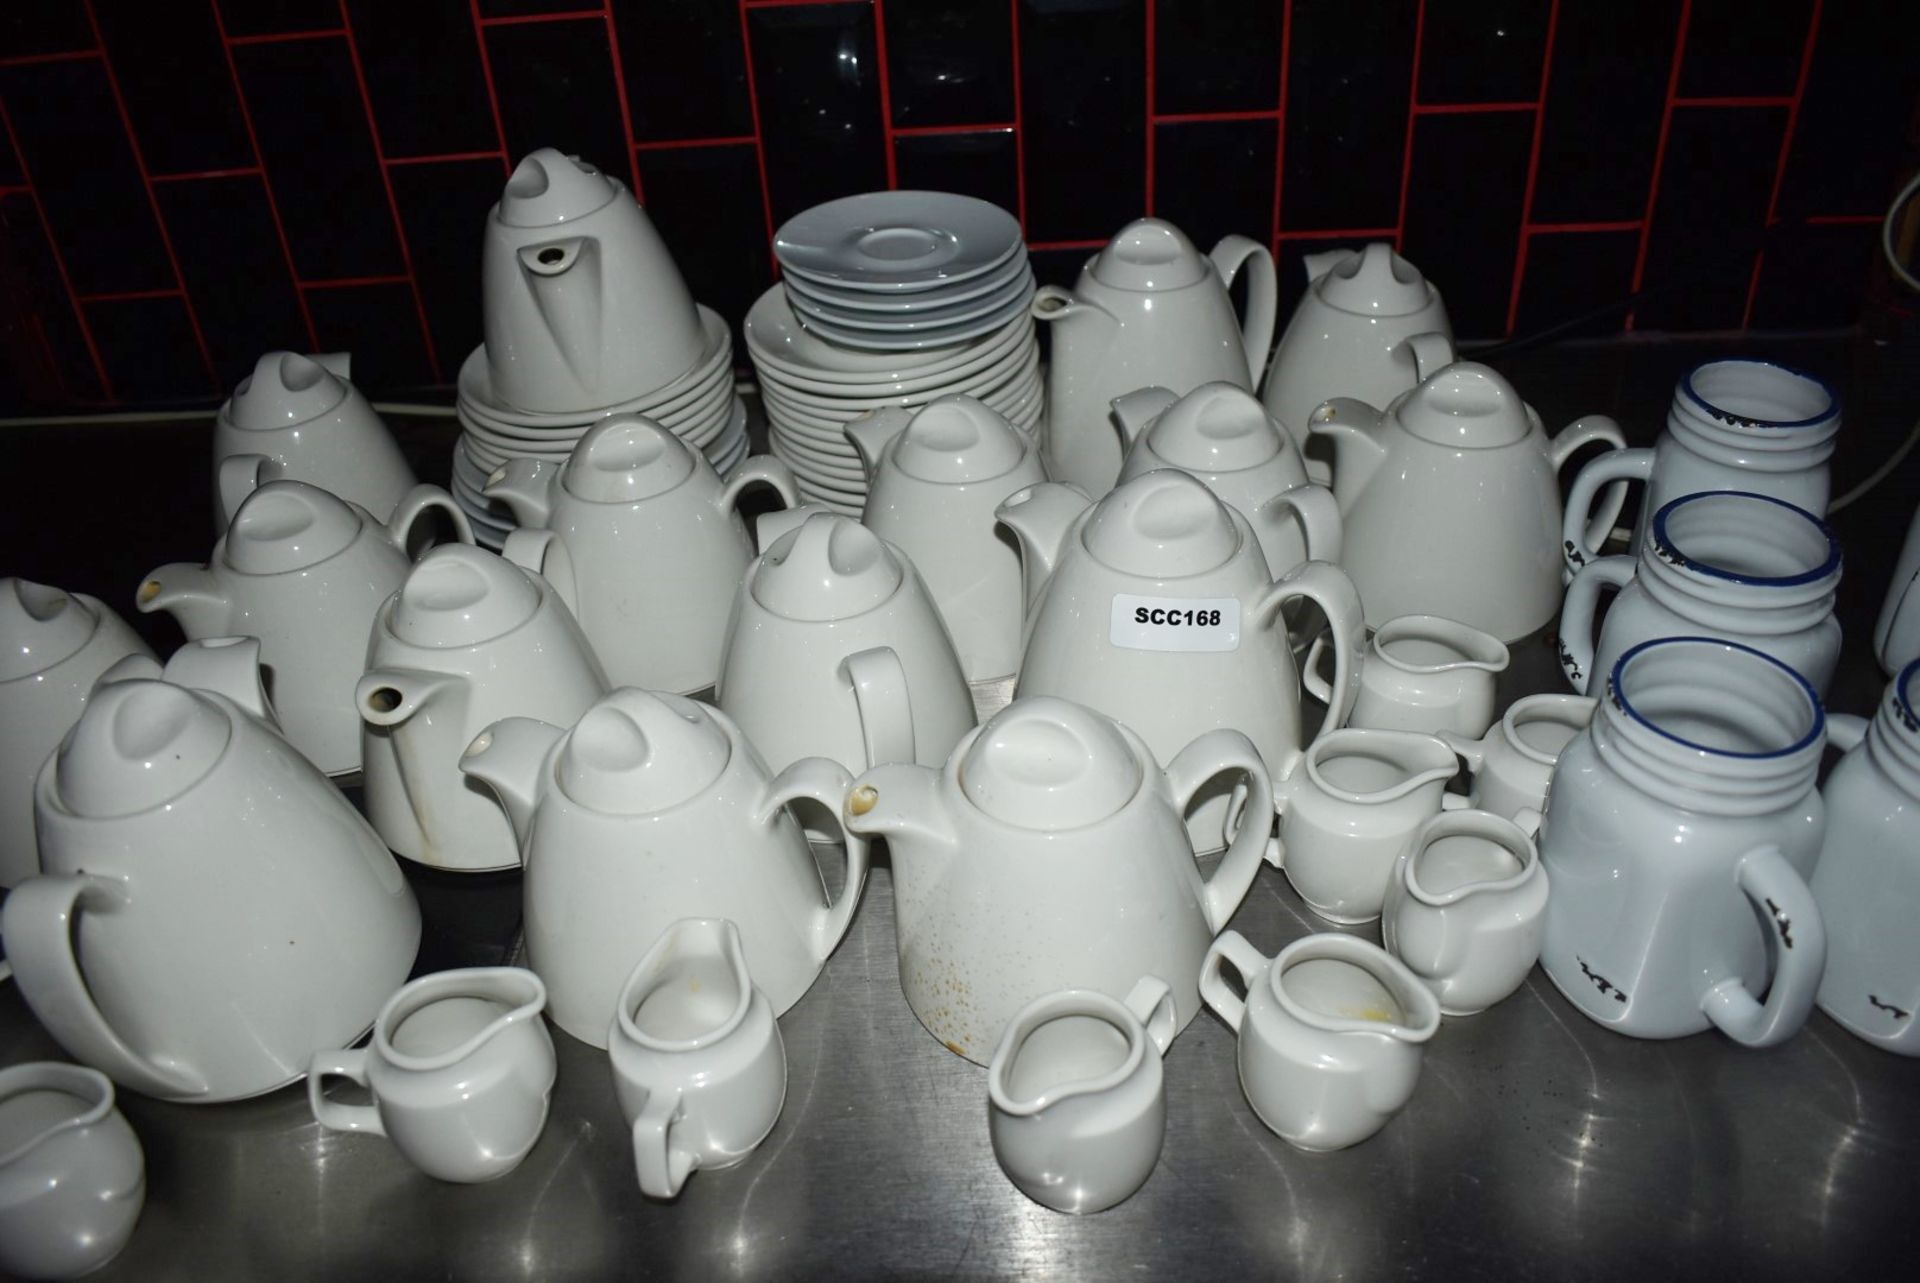 Assorted Collection Ceramic Coffee/Teaware to Include 80 Items - Teapots, Milk Jugs, Saucers & More - Image 4 of 10